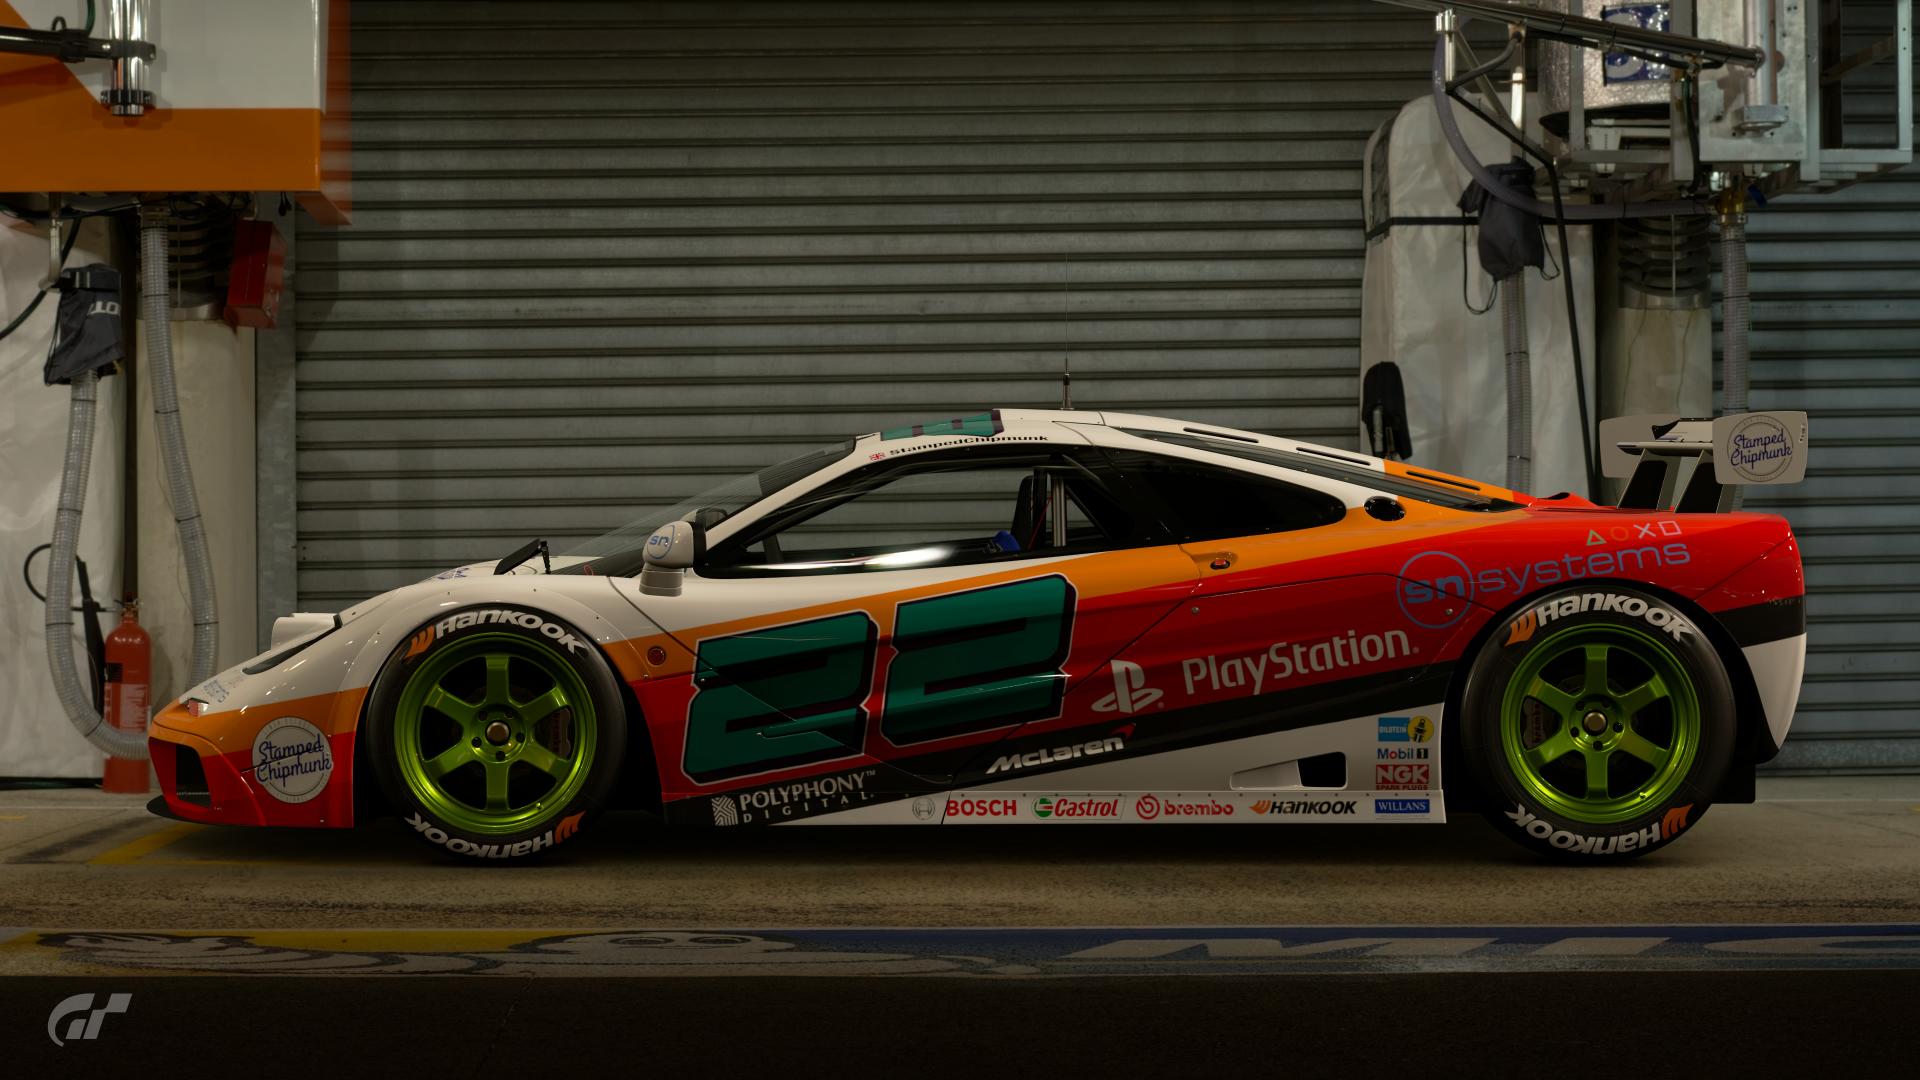 McLaren F1 GT - fictitious personal livery